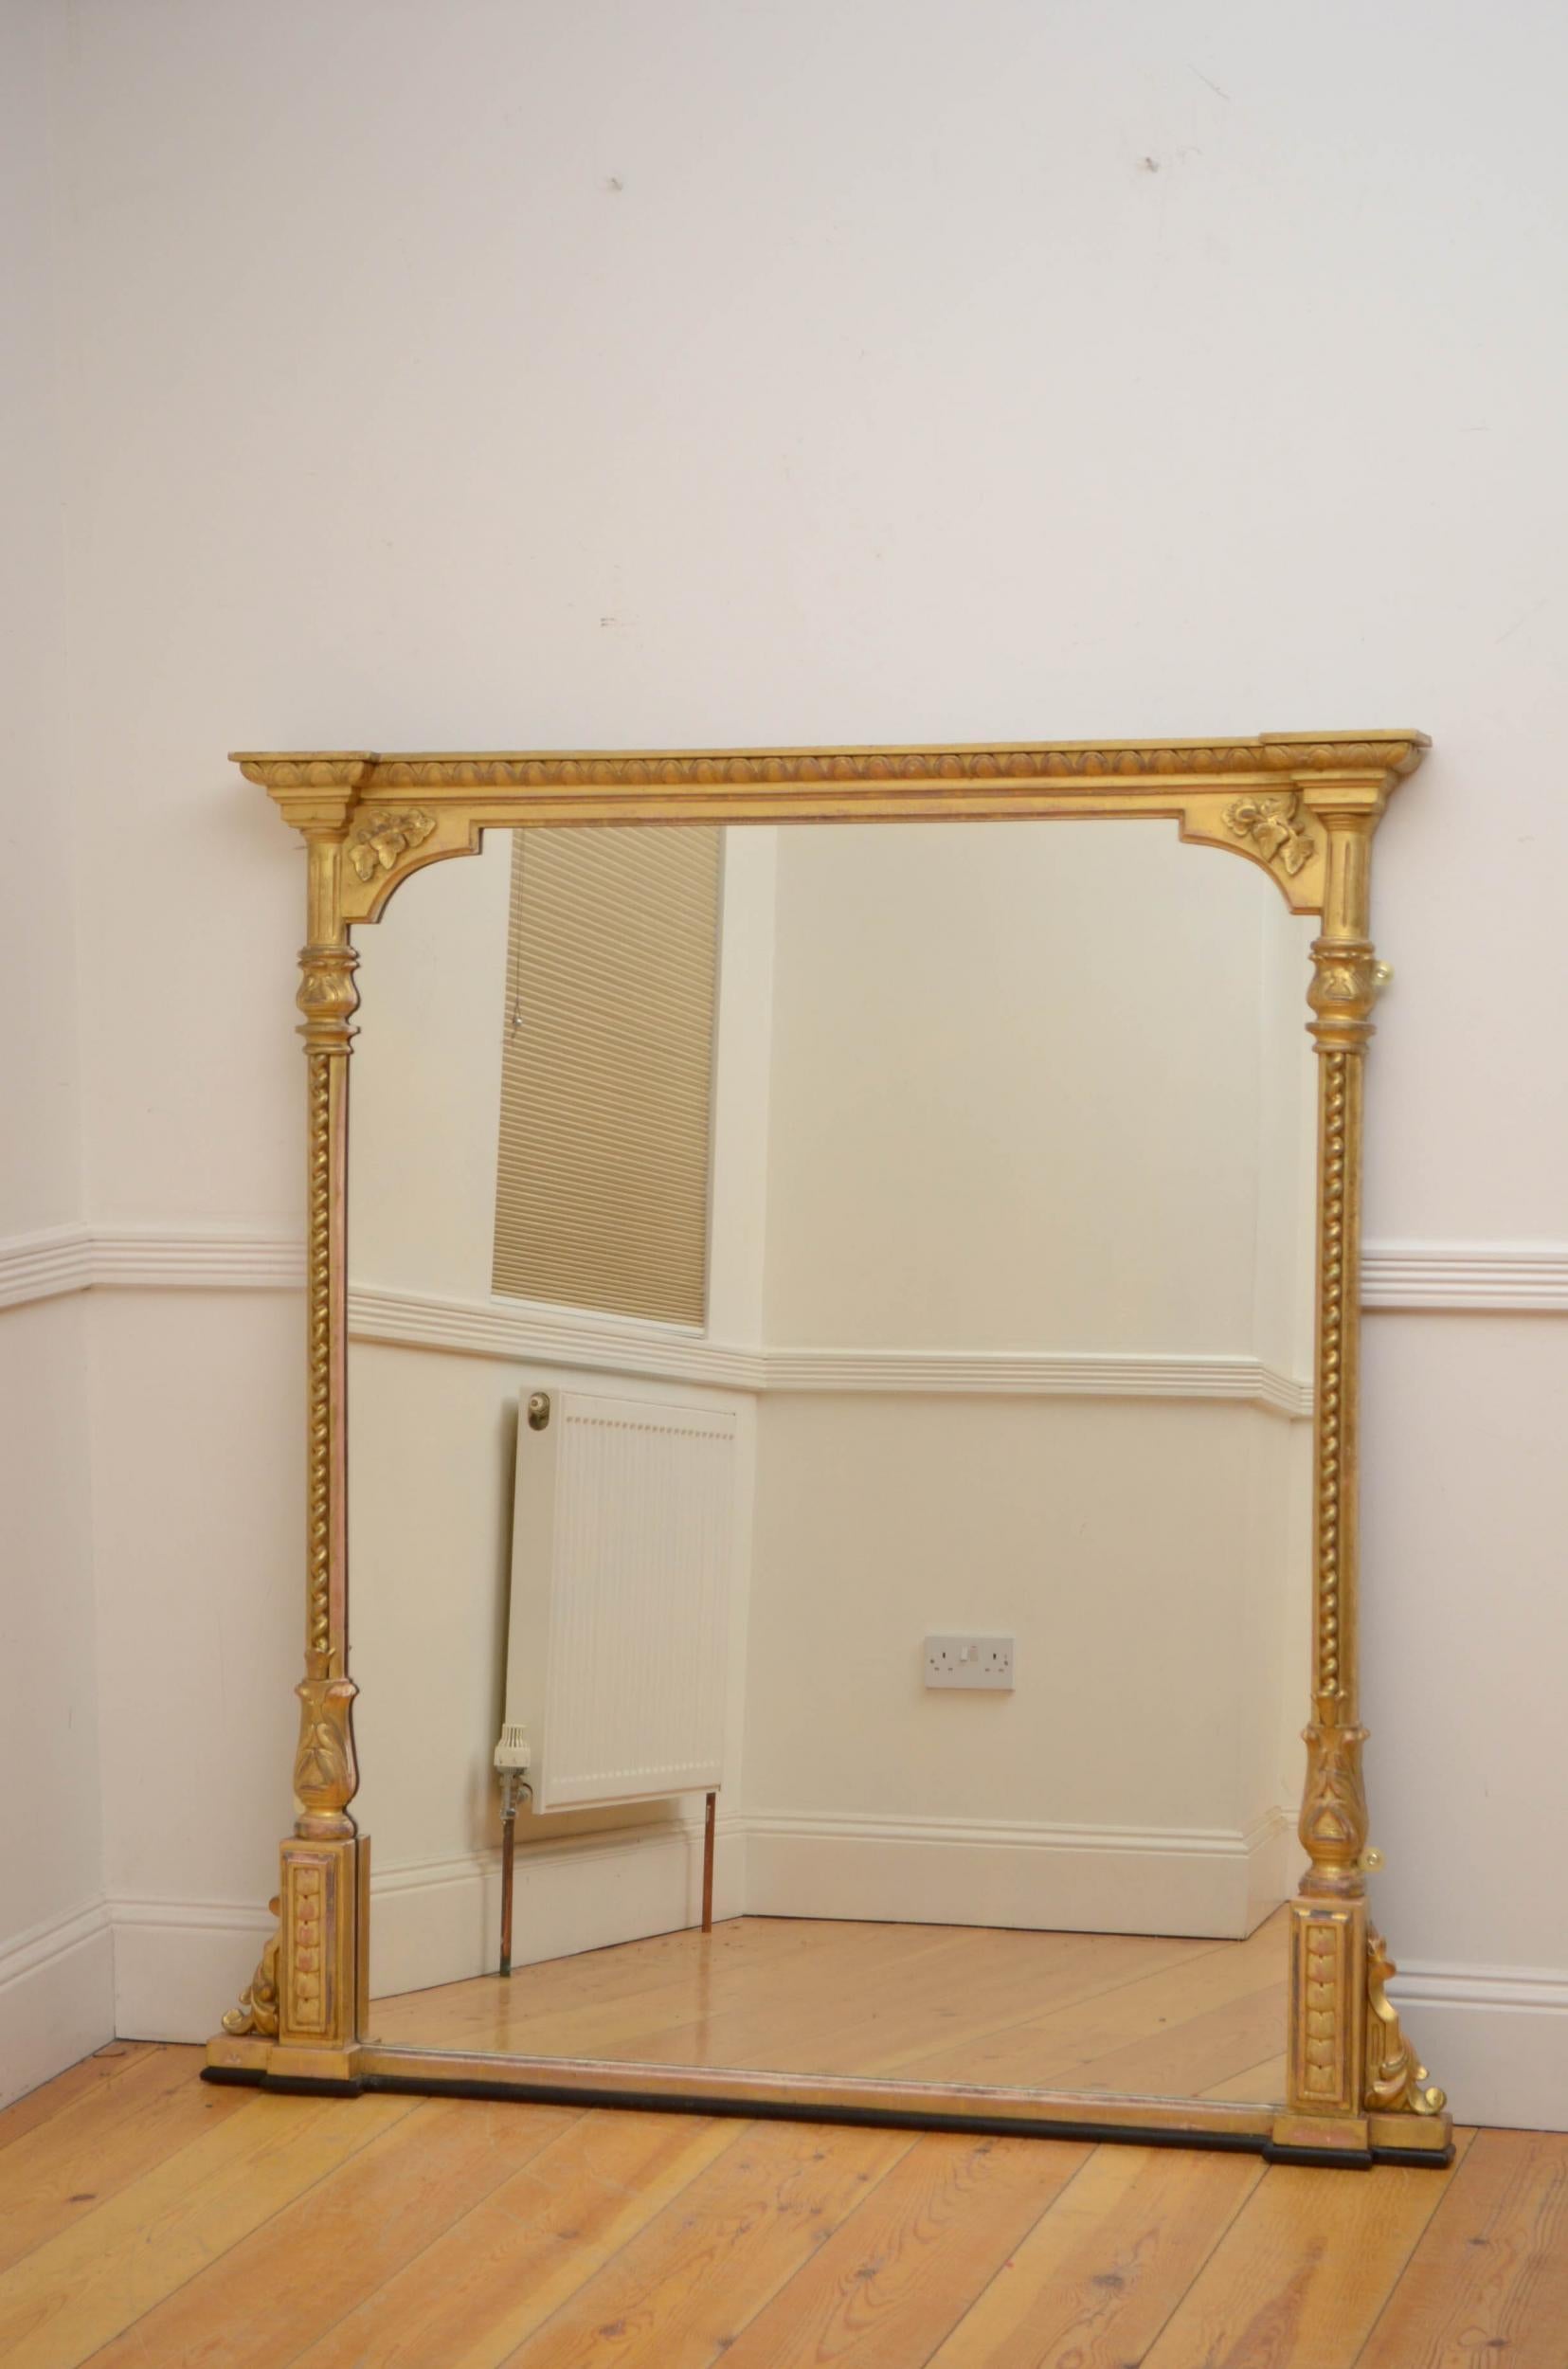 Sn5095 a large Victorian wall or overmantel mirror, having original glass with minor imperfections in moulded frame with twisted columns with floral carved capitals and egg and dart frieze all flanked by leafy scrolls to the base. This antique